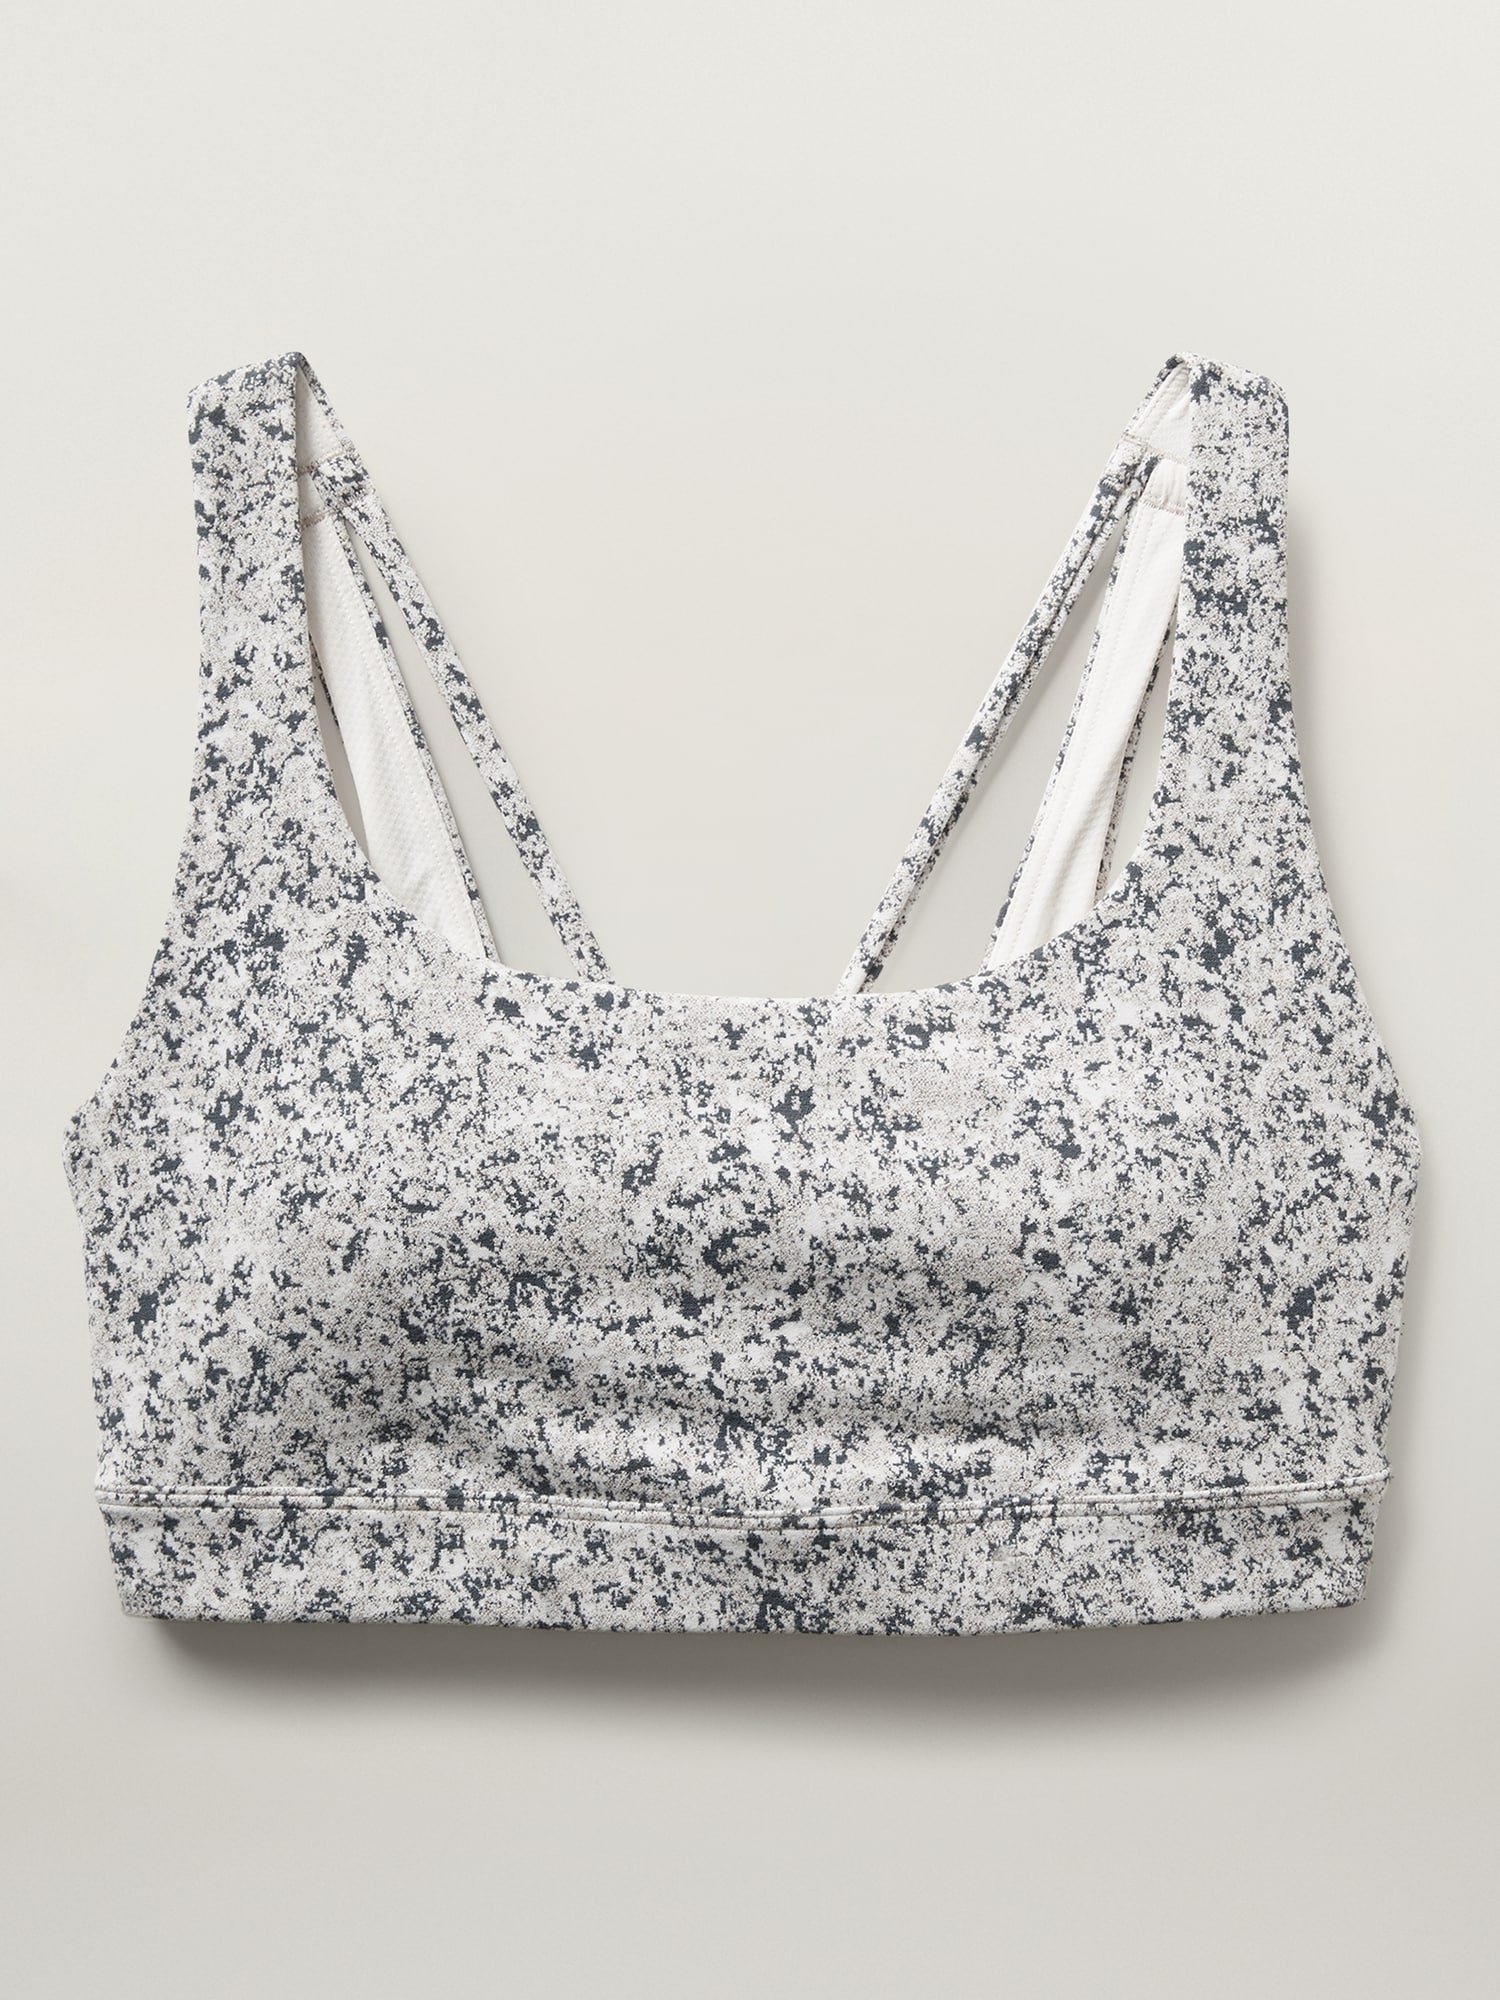 Athleta Exhale Bra in Opaque Lilac size 1X - $35 - From Marisa